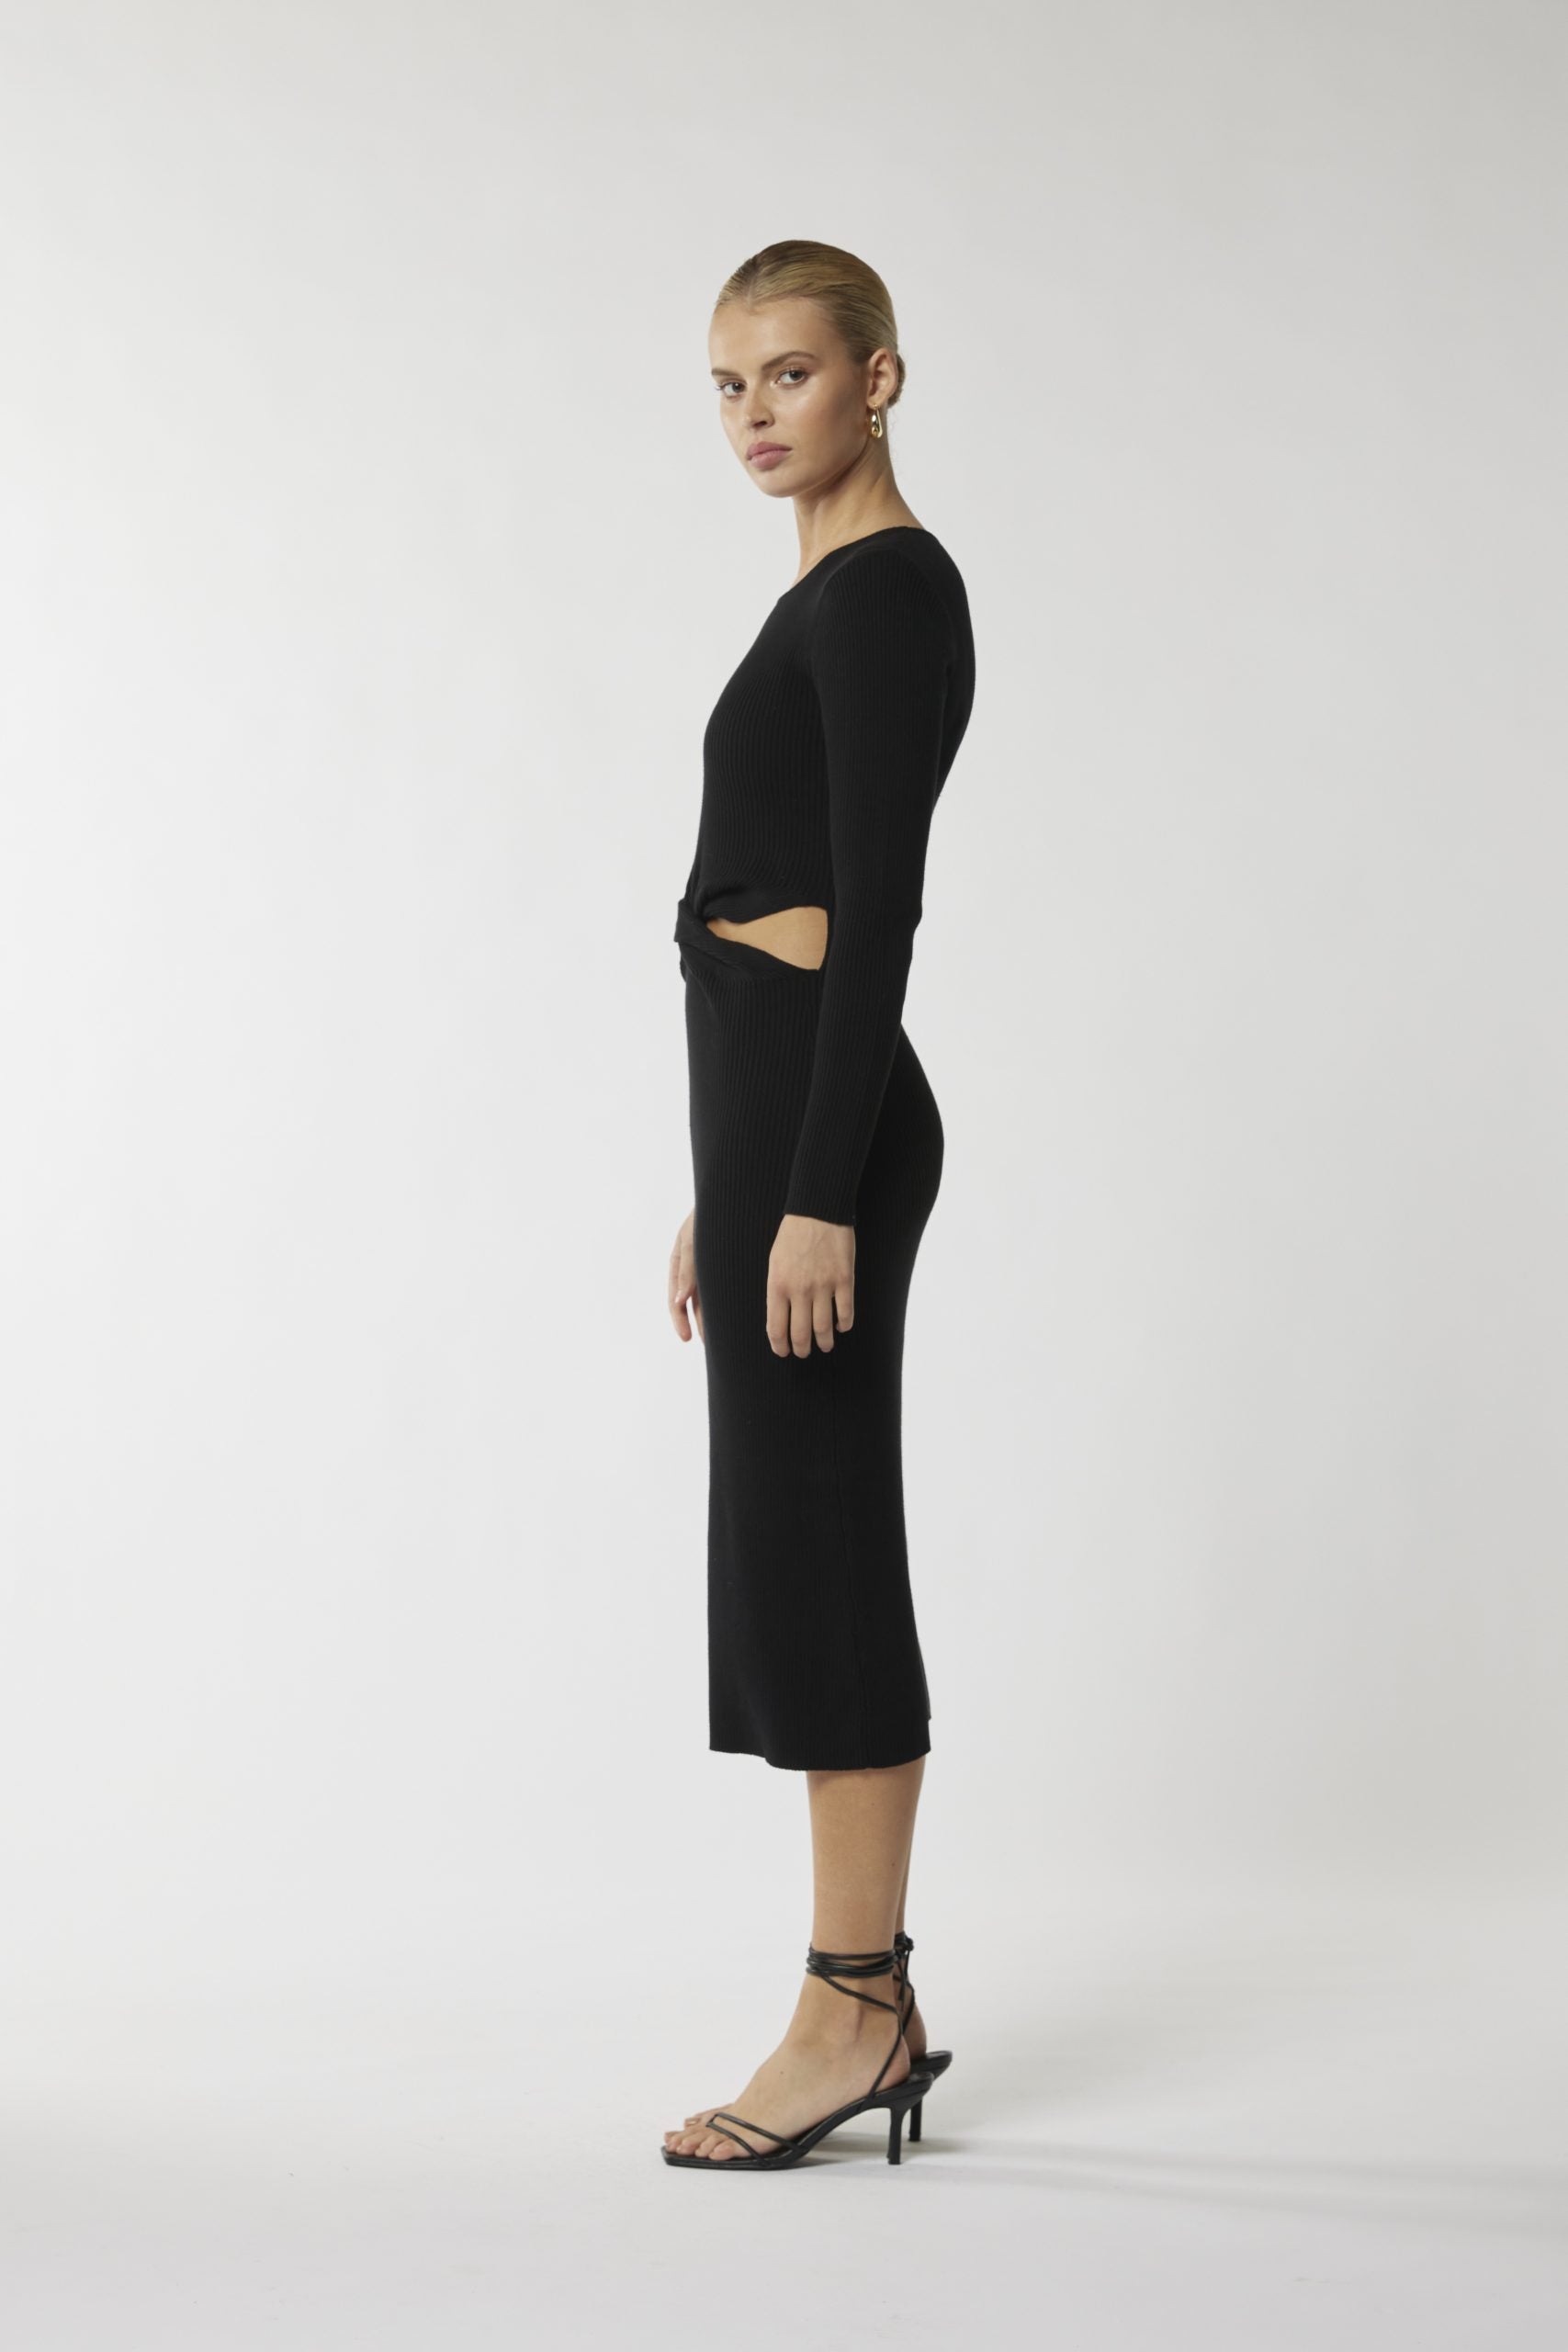 "Step into sophistication with our figure-flattering black midi dress. Perfect for any occasion!"